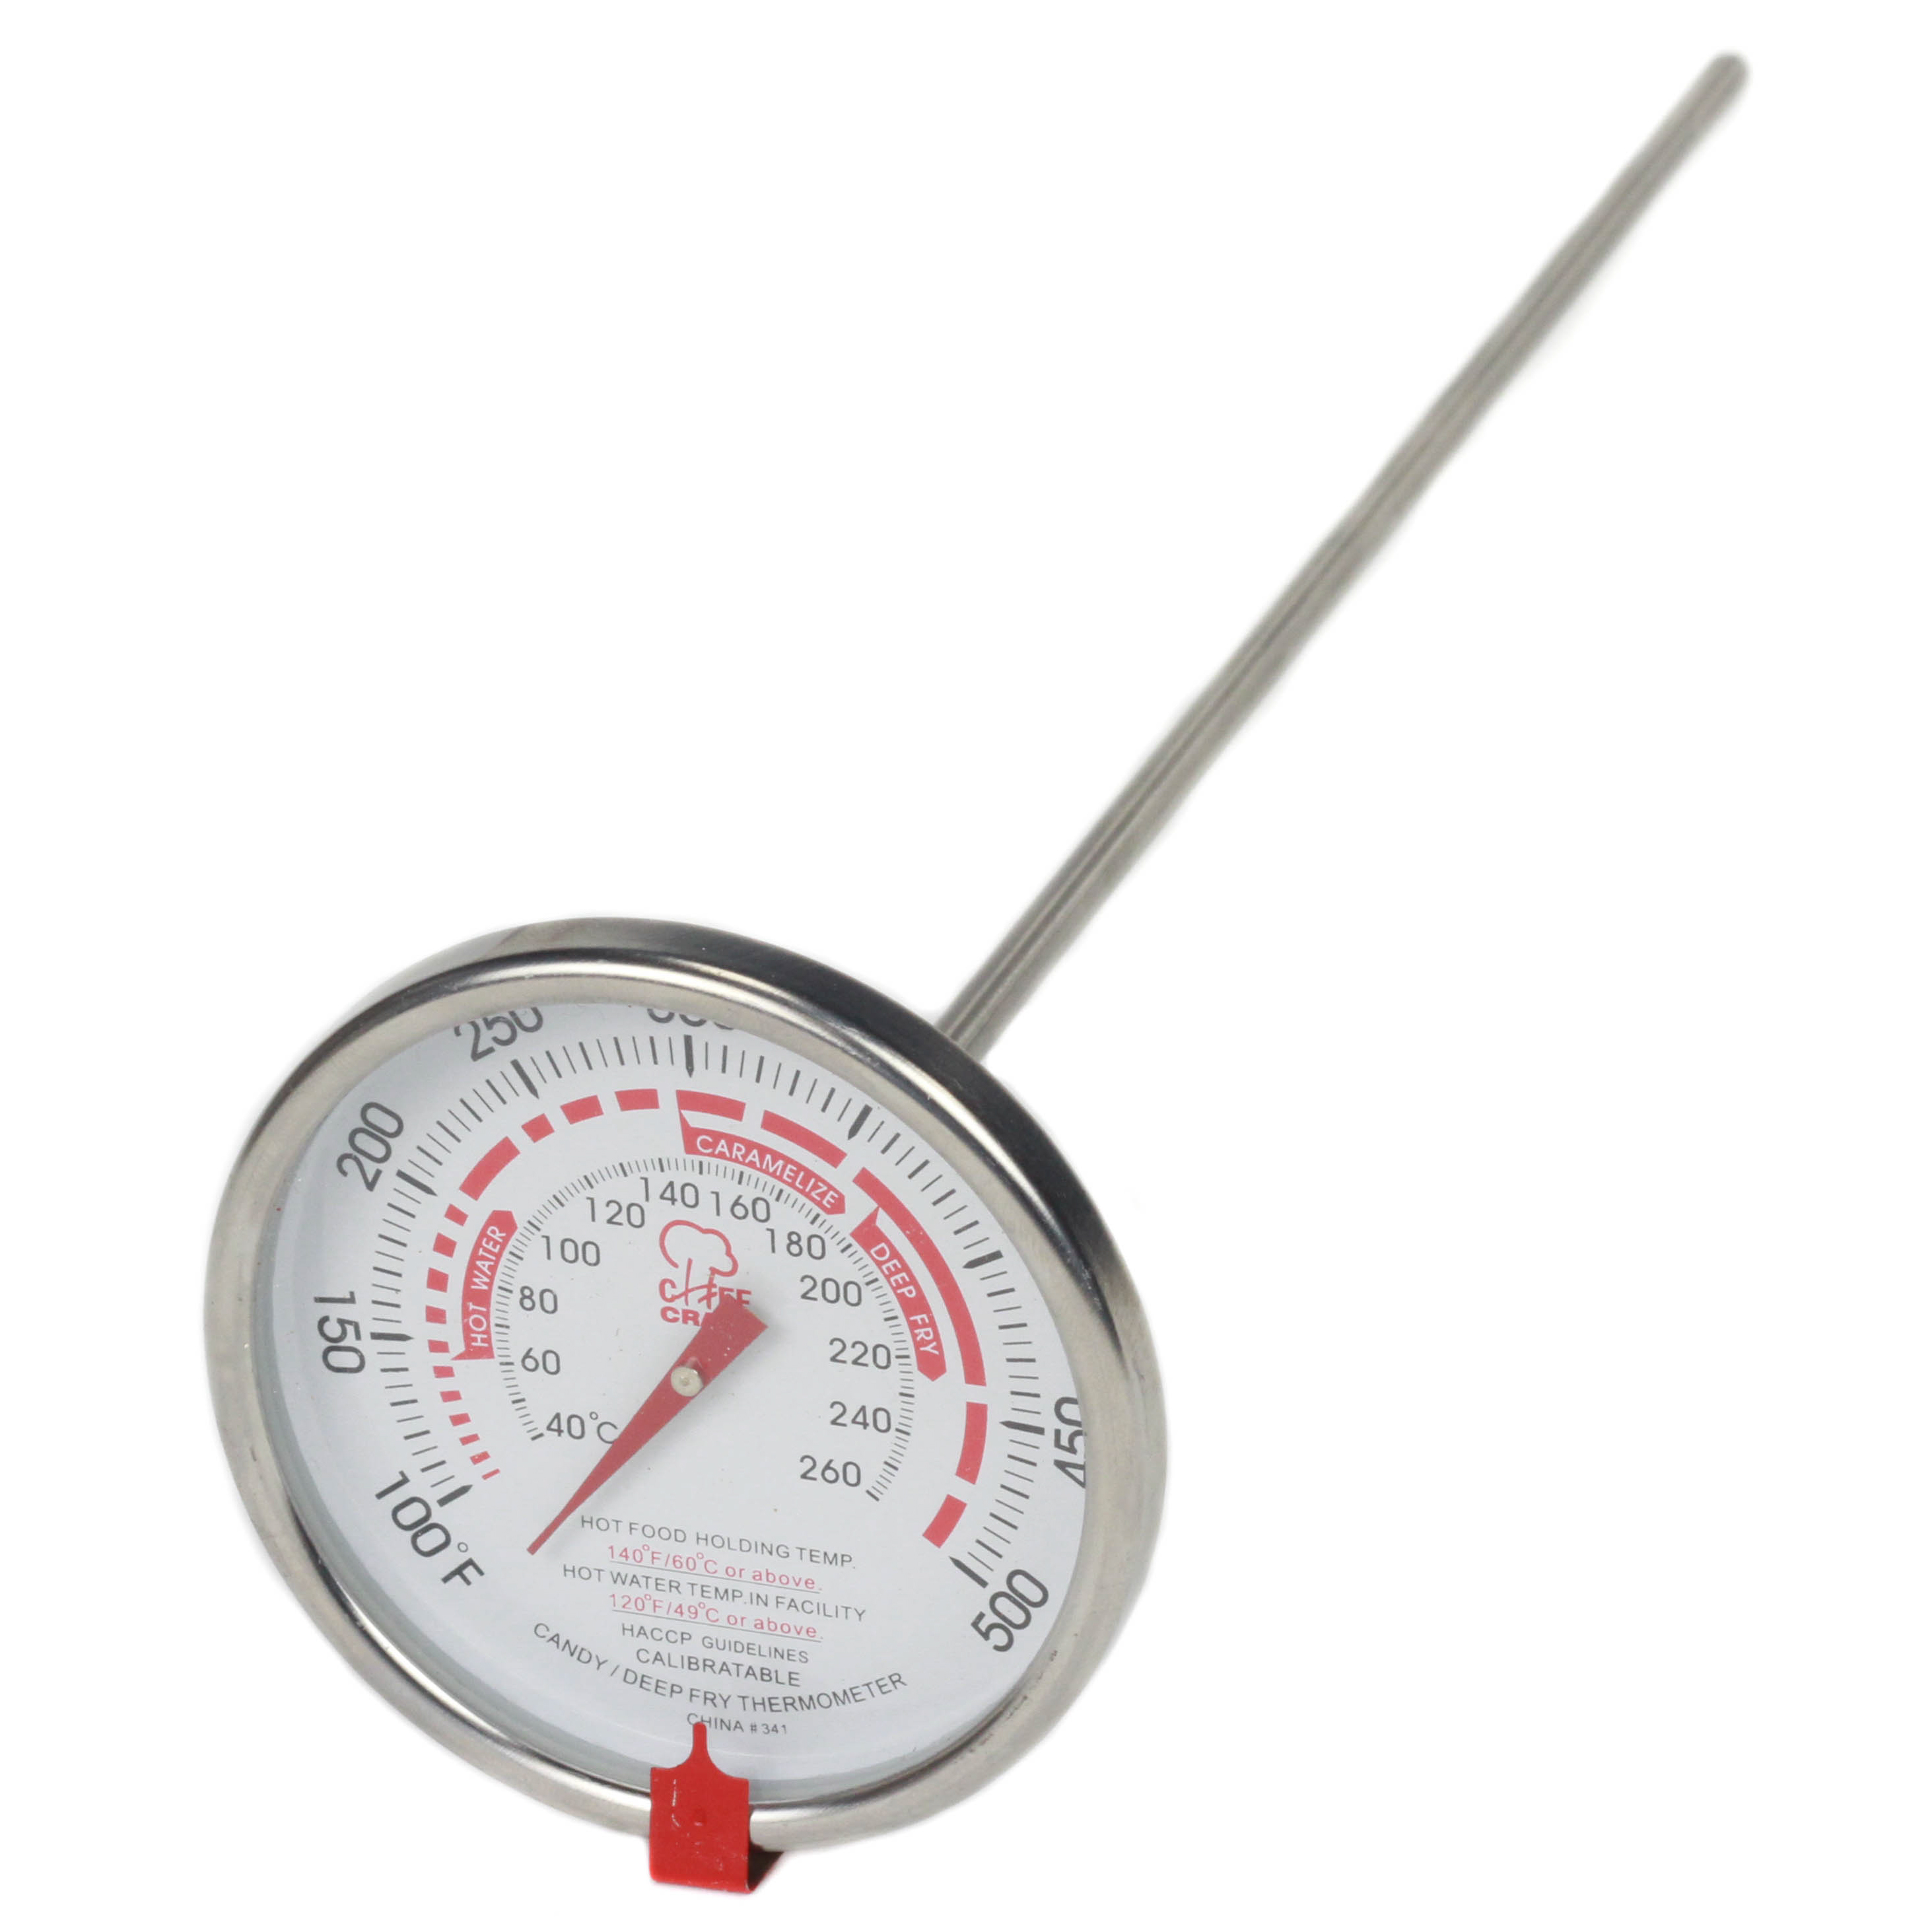 Deep Fryer or CANDY Thermometers